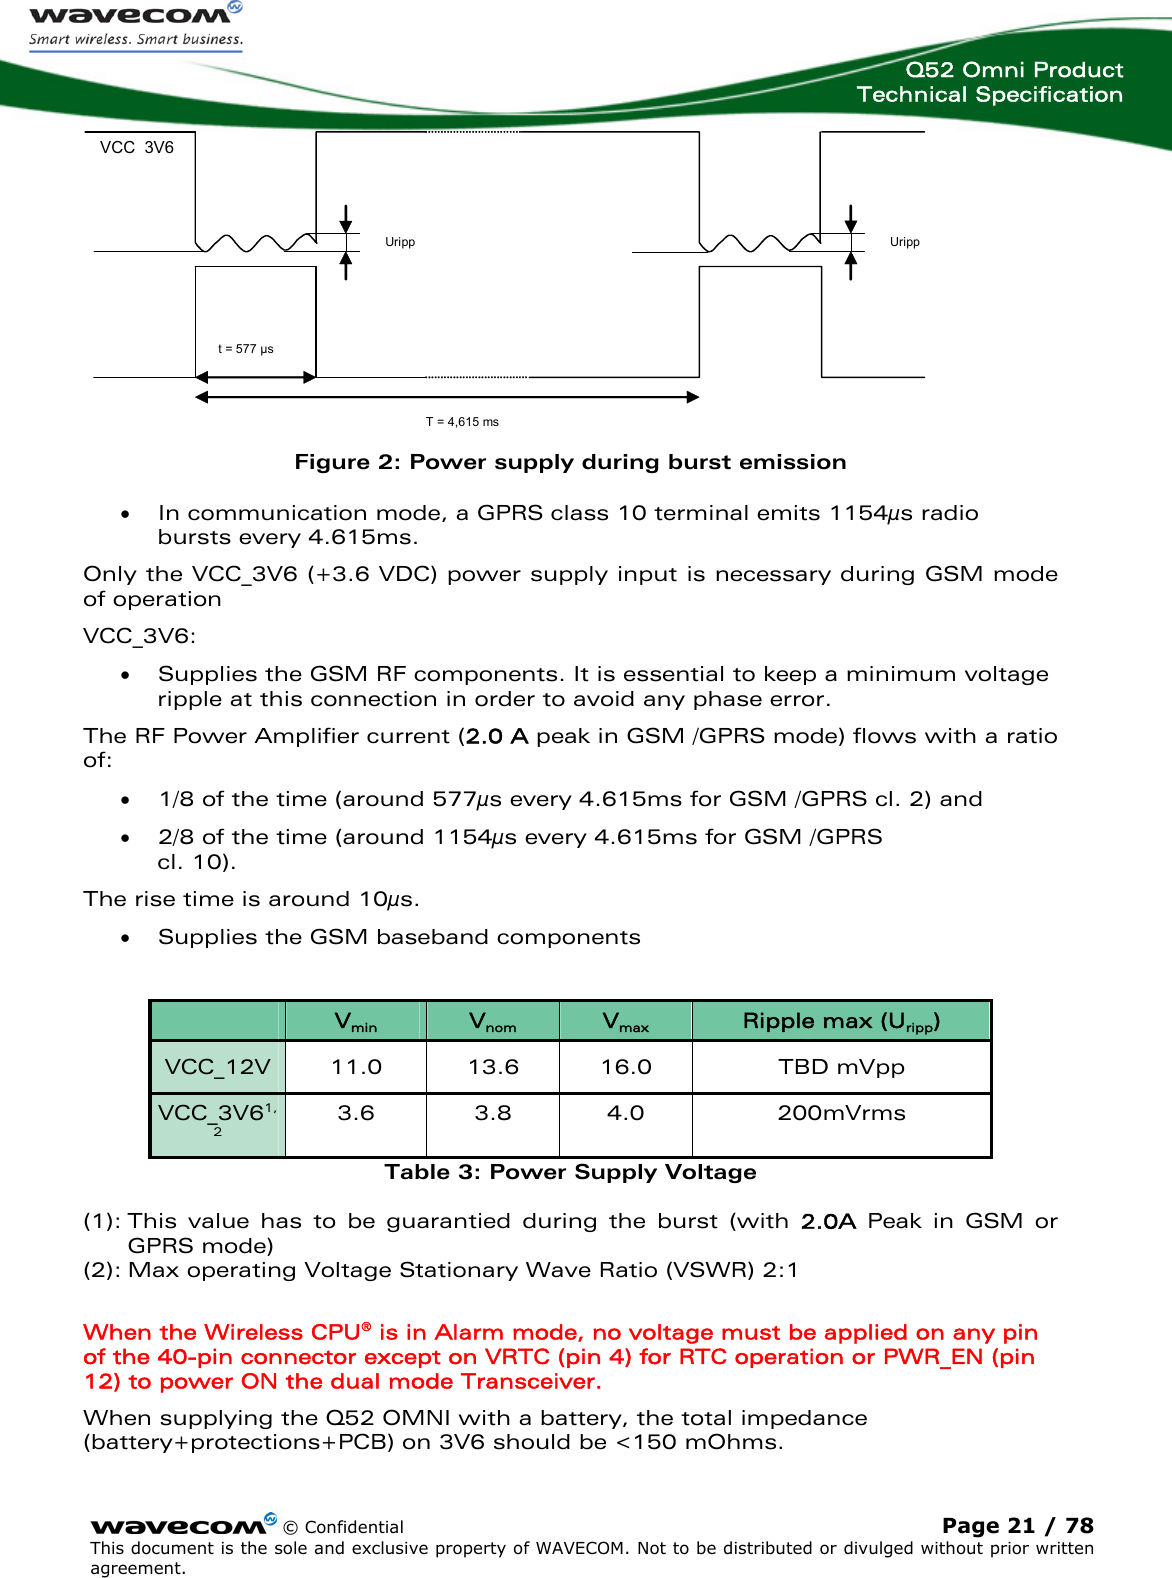  Q52 Omni Product Technical Specification    © Confidential Page 21 / 78 This document is the sole and exclusive property of WAVECOM. Not to be distributed or divulged without prior written agreement.   Uripp VCC 3V6 Uripp  T = 4,615 ms t = 577 µs  Figure 2: Power supply during burst emission • In communication mode, a GPRS class 10 terminal emits 1154μs radio bursts every 4.615ms. Only the VCC_3V6 (+3.6 VDC) power supply input is necessary during GSM mode of operation VCC_3V6:  • Supplies the GSM RF components. It is essential to keep a minimum voltage ripple at this connection in order to avoid any phase error.  The RF Power Amplifier current (2.0 A peak in GSM /GPRS mode) flows with a ratio of:  • 1/8 of the time (around 577μs every 4.615ms for GSM /GPRS cl. 2) and  • 2/8 of the time (around 1154μs every 4.615ms for GSM /GPRS  cl. 10).  The rise time is around 10μs.  • Supplies the GSM baseband components    Vmin  Vnom  Vmax Ripple max (Uripp) VCC_12V  11.0  13.6  16.0  TBD mVpp VCC_3V61,2 3.6 3.8 4.0  200mVrms Table 3: Power Supply Voltage (1): This value has to be guarantied during the burst (with 2.0A Peak in GSM or GPRS mode) (2): Max operating Voltage Stationary Wave Ratio (VSWR) 2:1  When the Wireless CPU® is in Alarm mode, no voltage must be applied on any pin of the 40-pin connector except on VRTC (pin 4) for RTC operation or PWR_EN (pin 12) to power ON the dual mode Transceiver.  When supplying the Q52 OMNI with a battery, the total impedance (battery+protections+PCB) on 3V6 should be &lt;150 mOhms. 